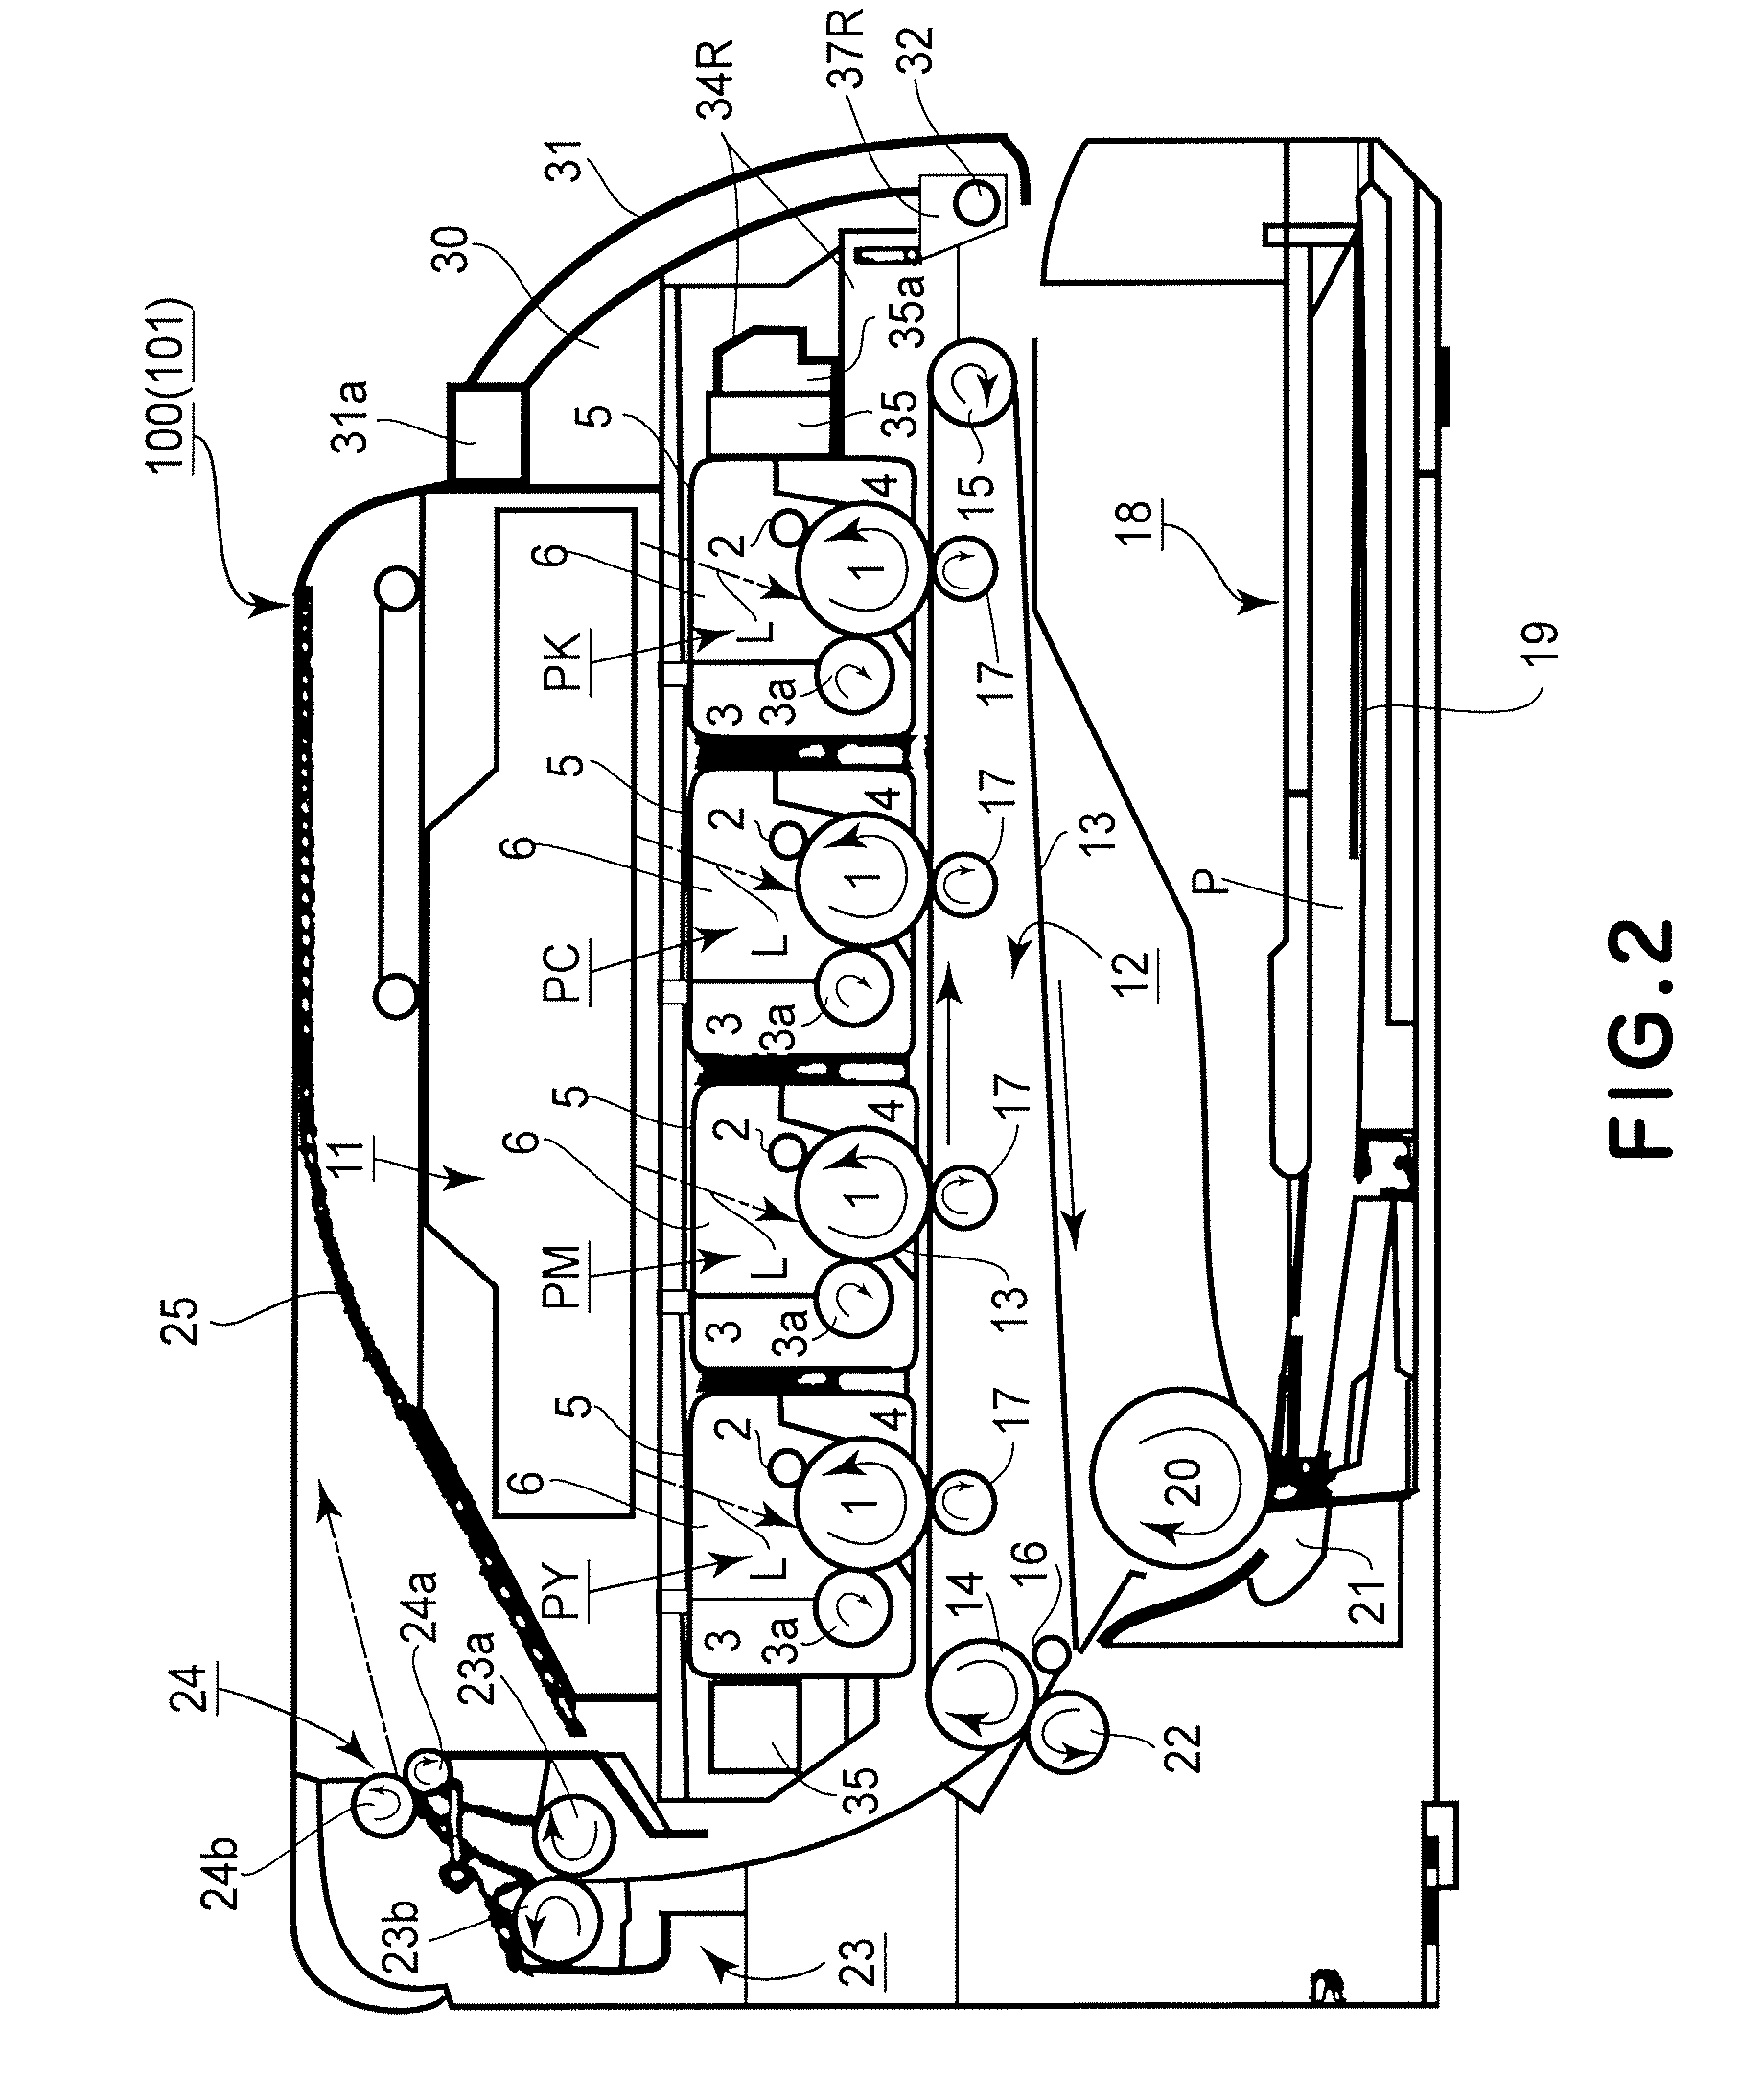 Electrophotographic image forming apparatus including a tray for carrying a process cartridge